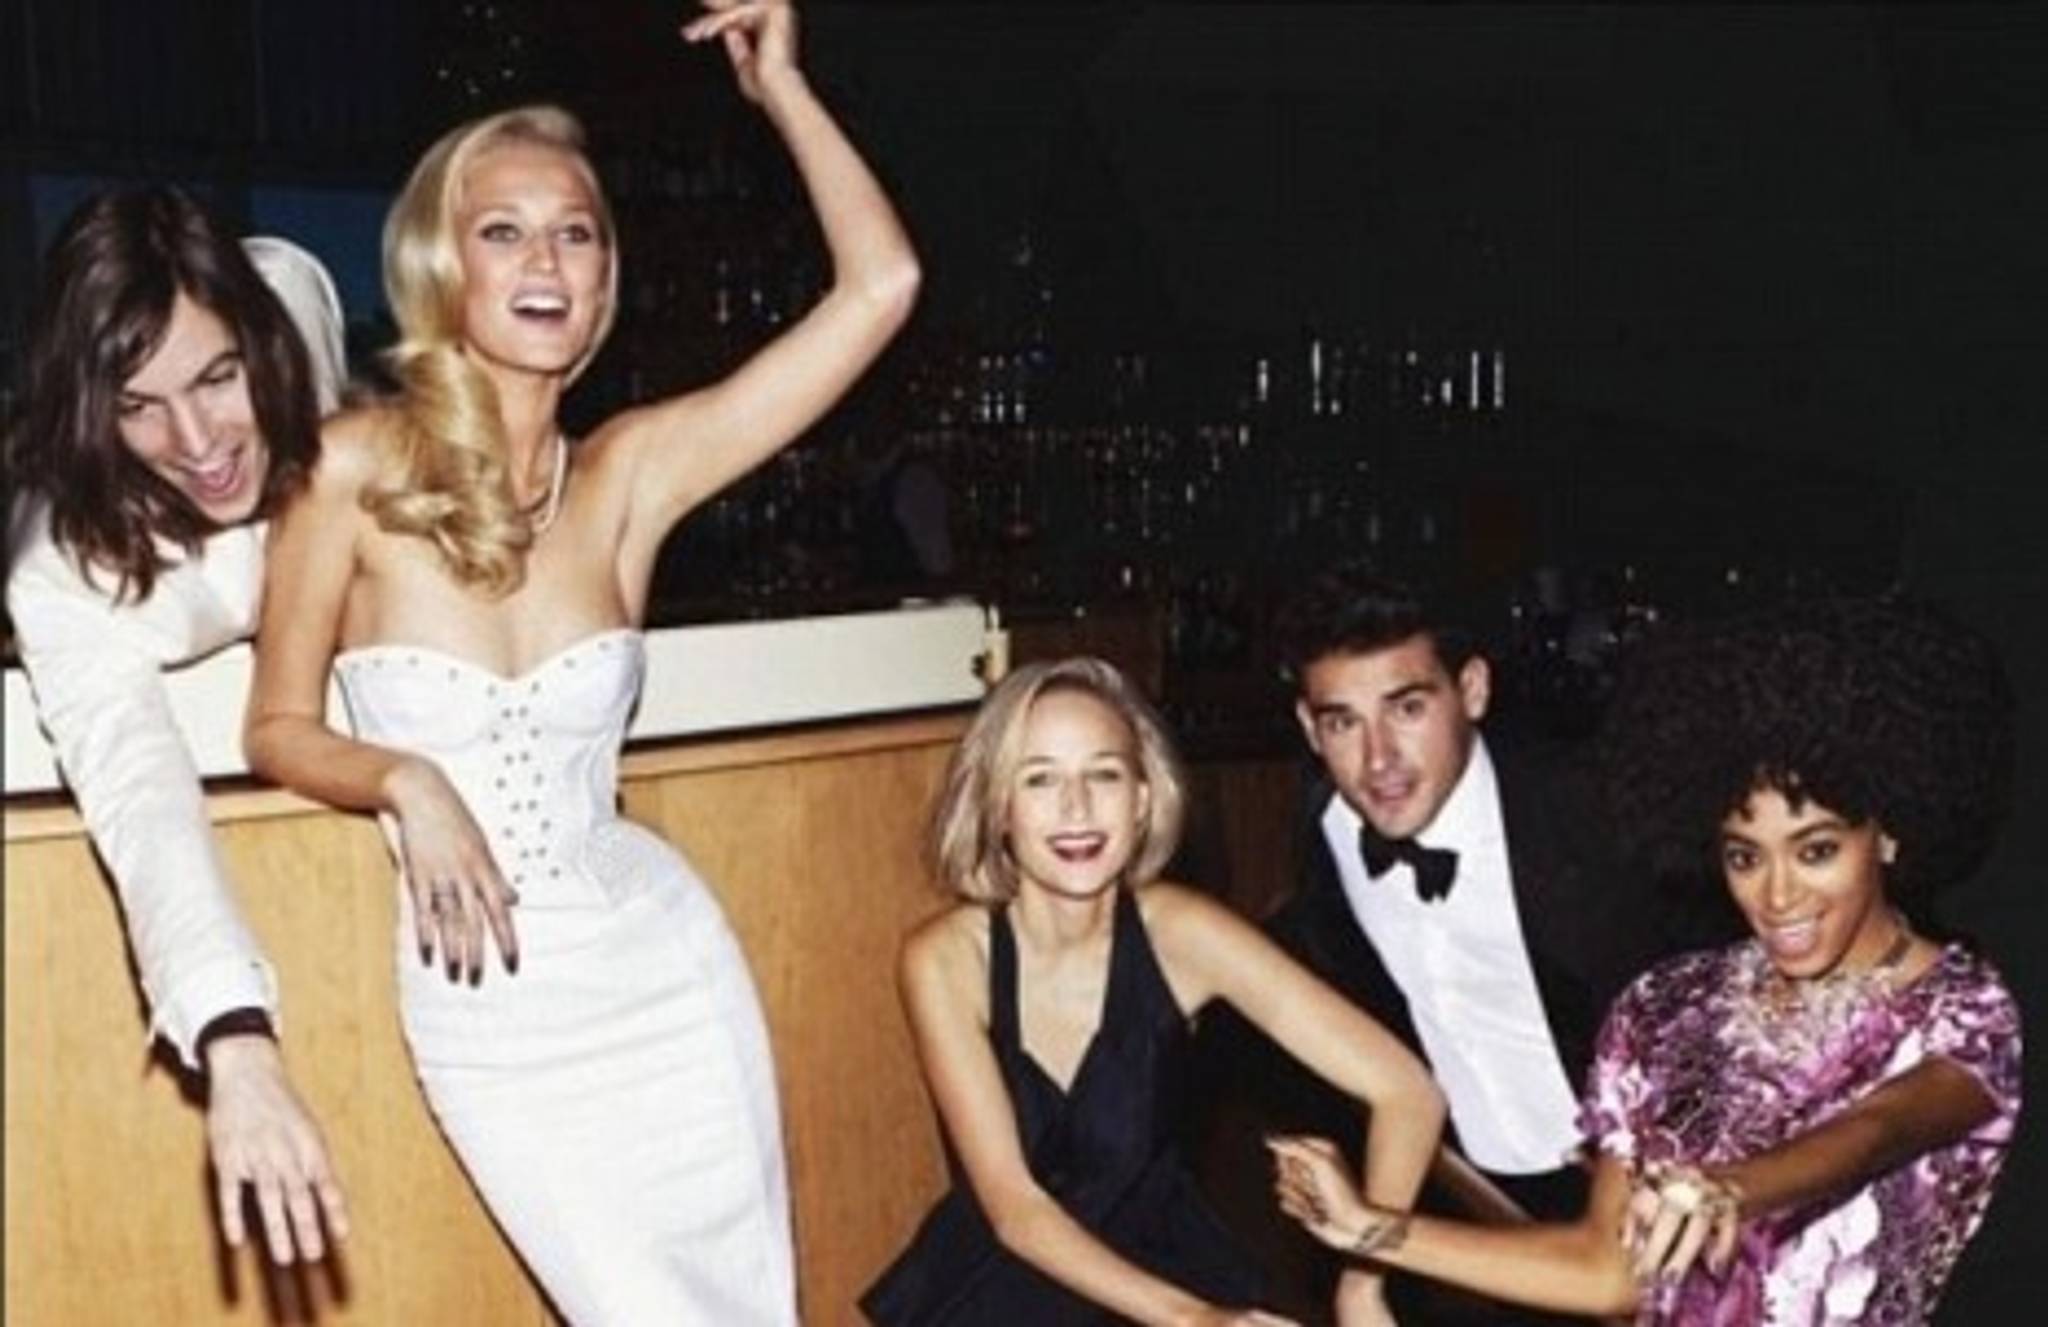 Luxy is Tinder for super-rich people